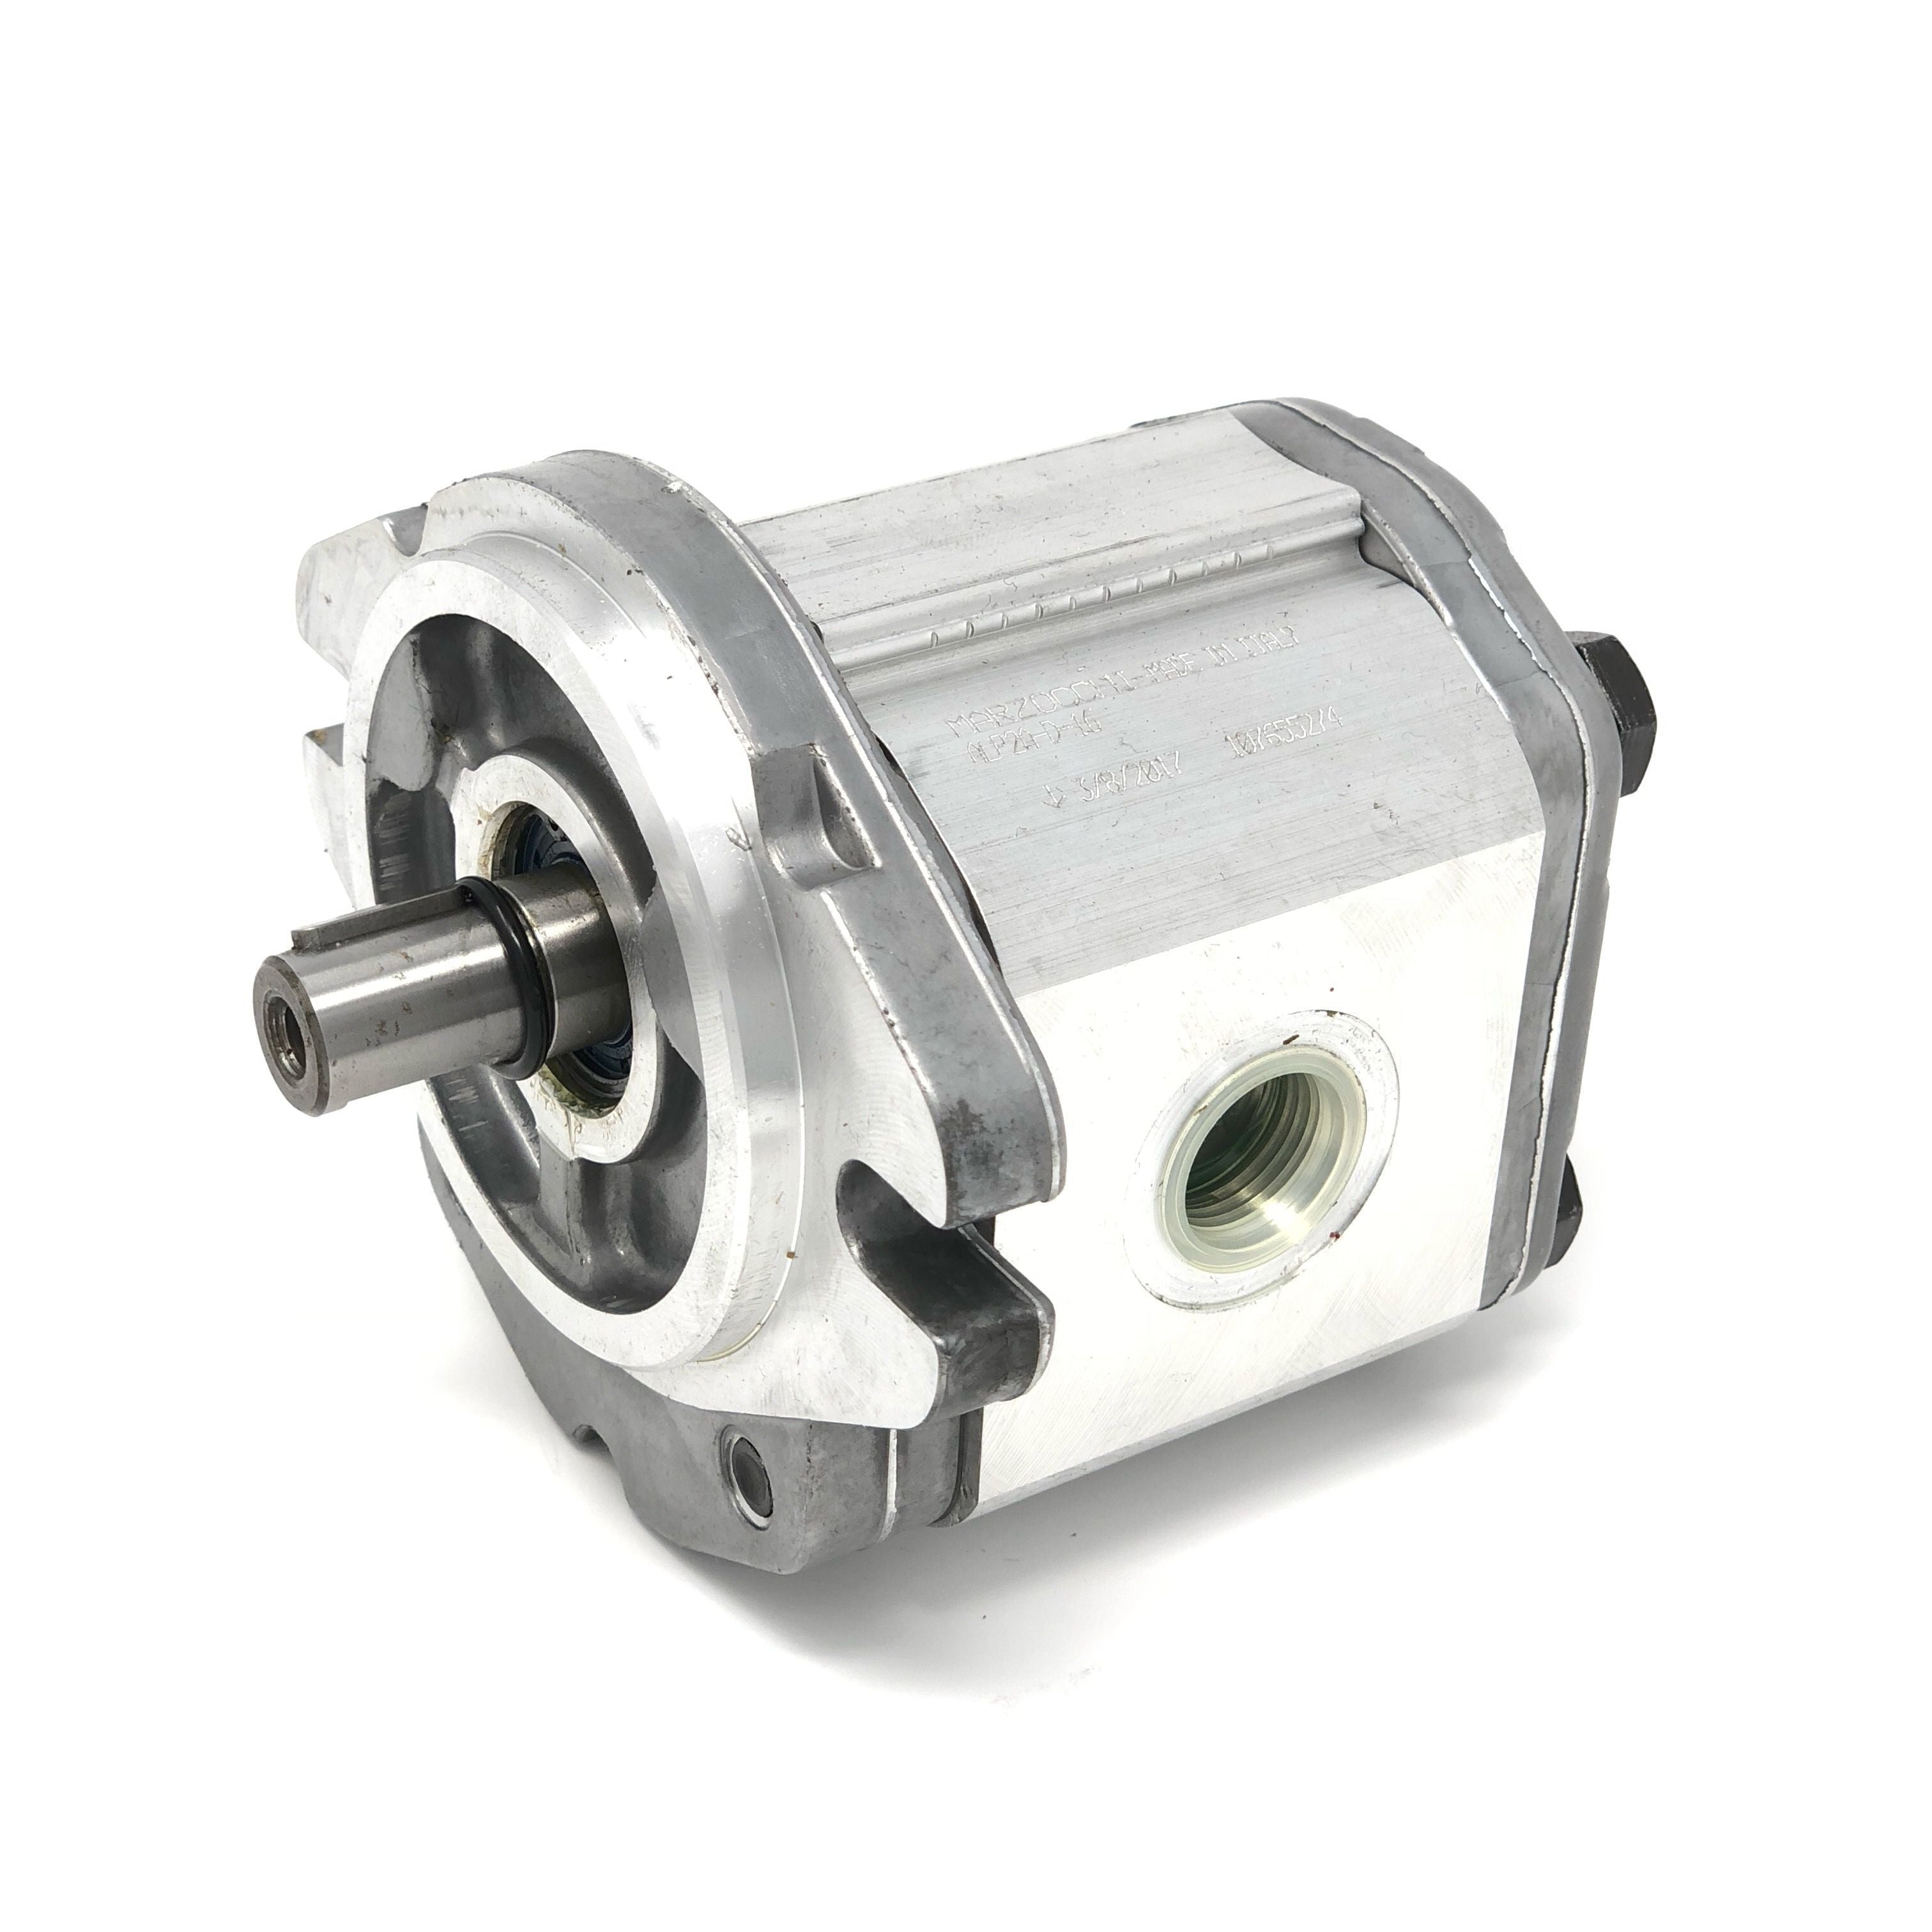 ALP2A-D-20 : Marzocchi Gear Pump, CW, 14.1cc (0.8601in3), 6.7 GPM, 3335psi, 3200 RPM, #12 SAE (3/4") In, #10 SAE (5/8") Out, Keyed Shaft 5/8" Bore x 5/32" Key, SAE A 2-Bolt Mount